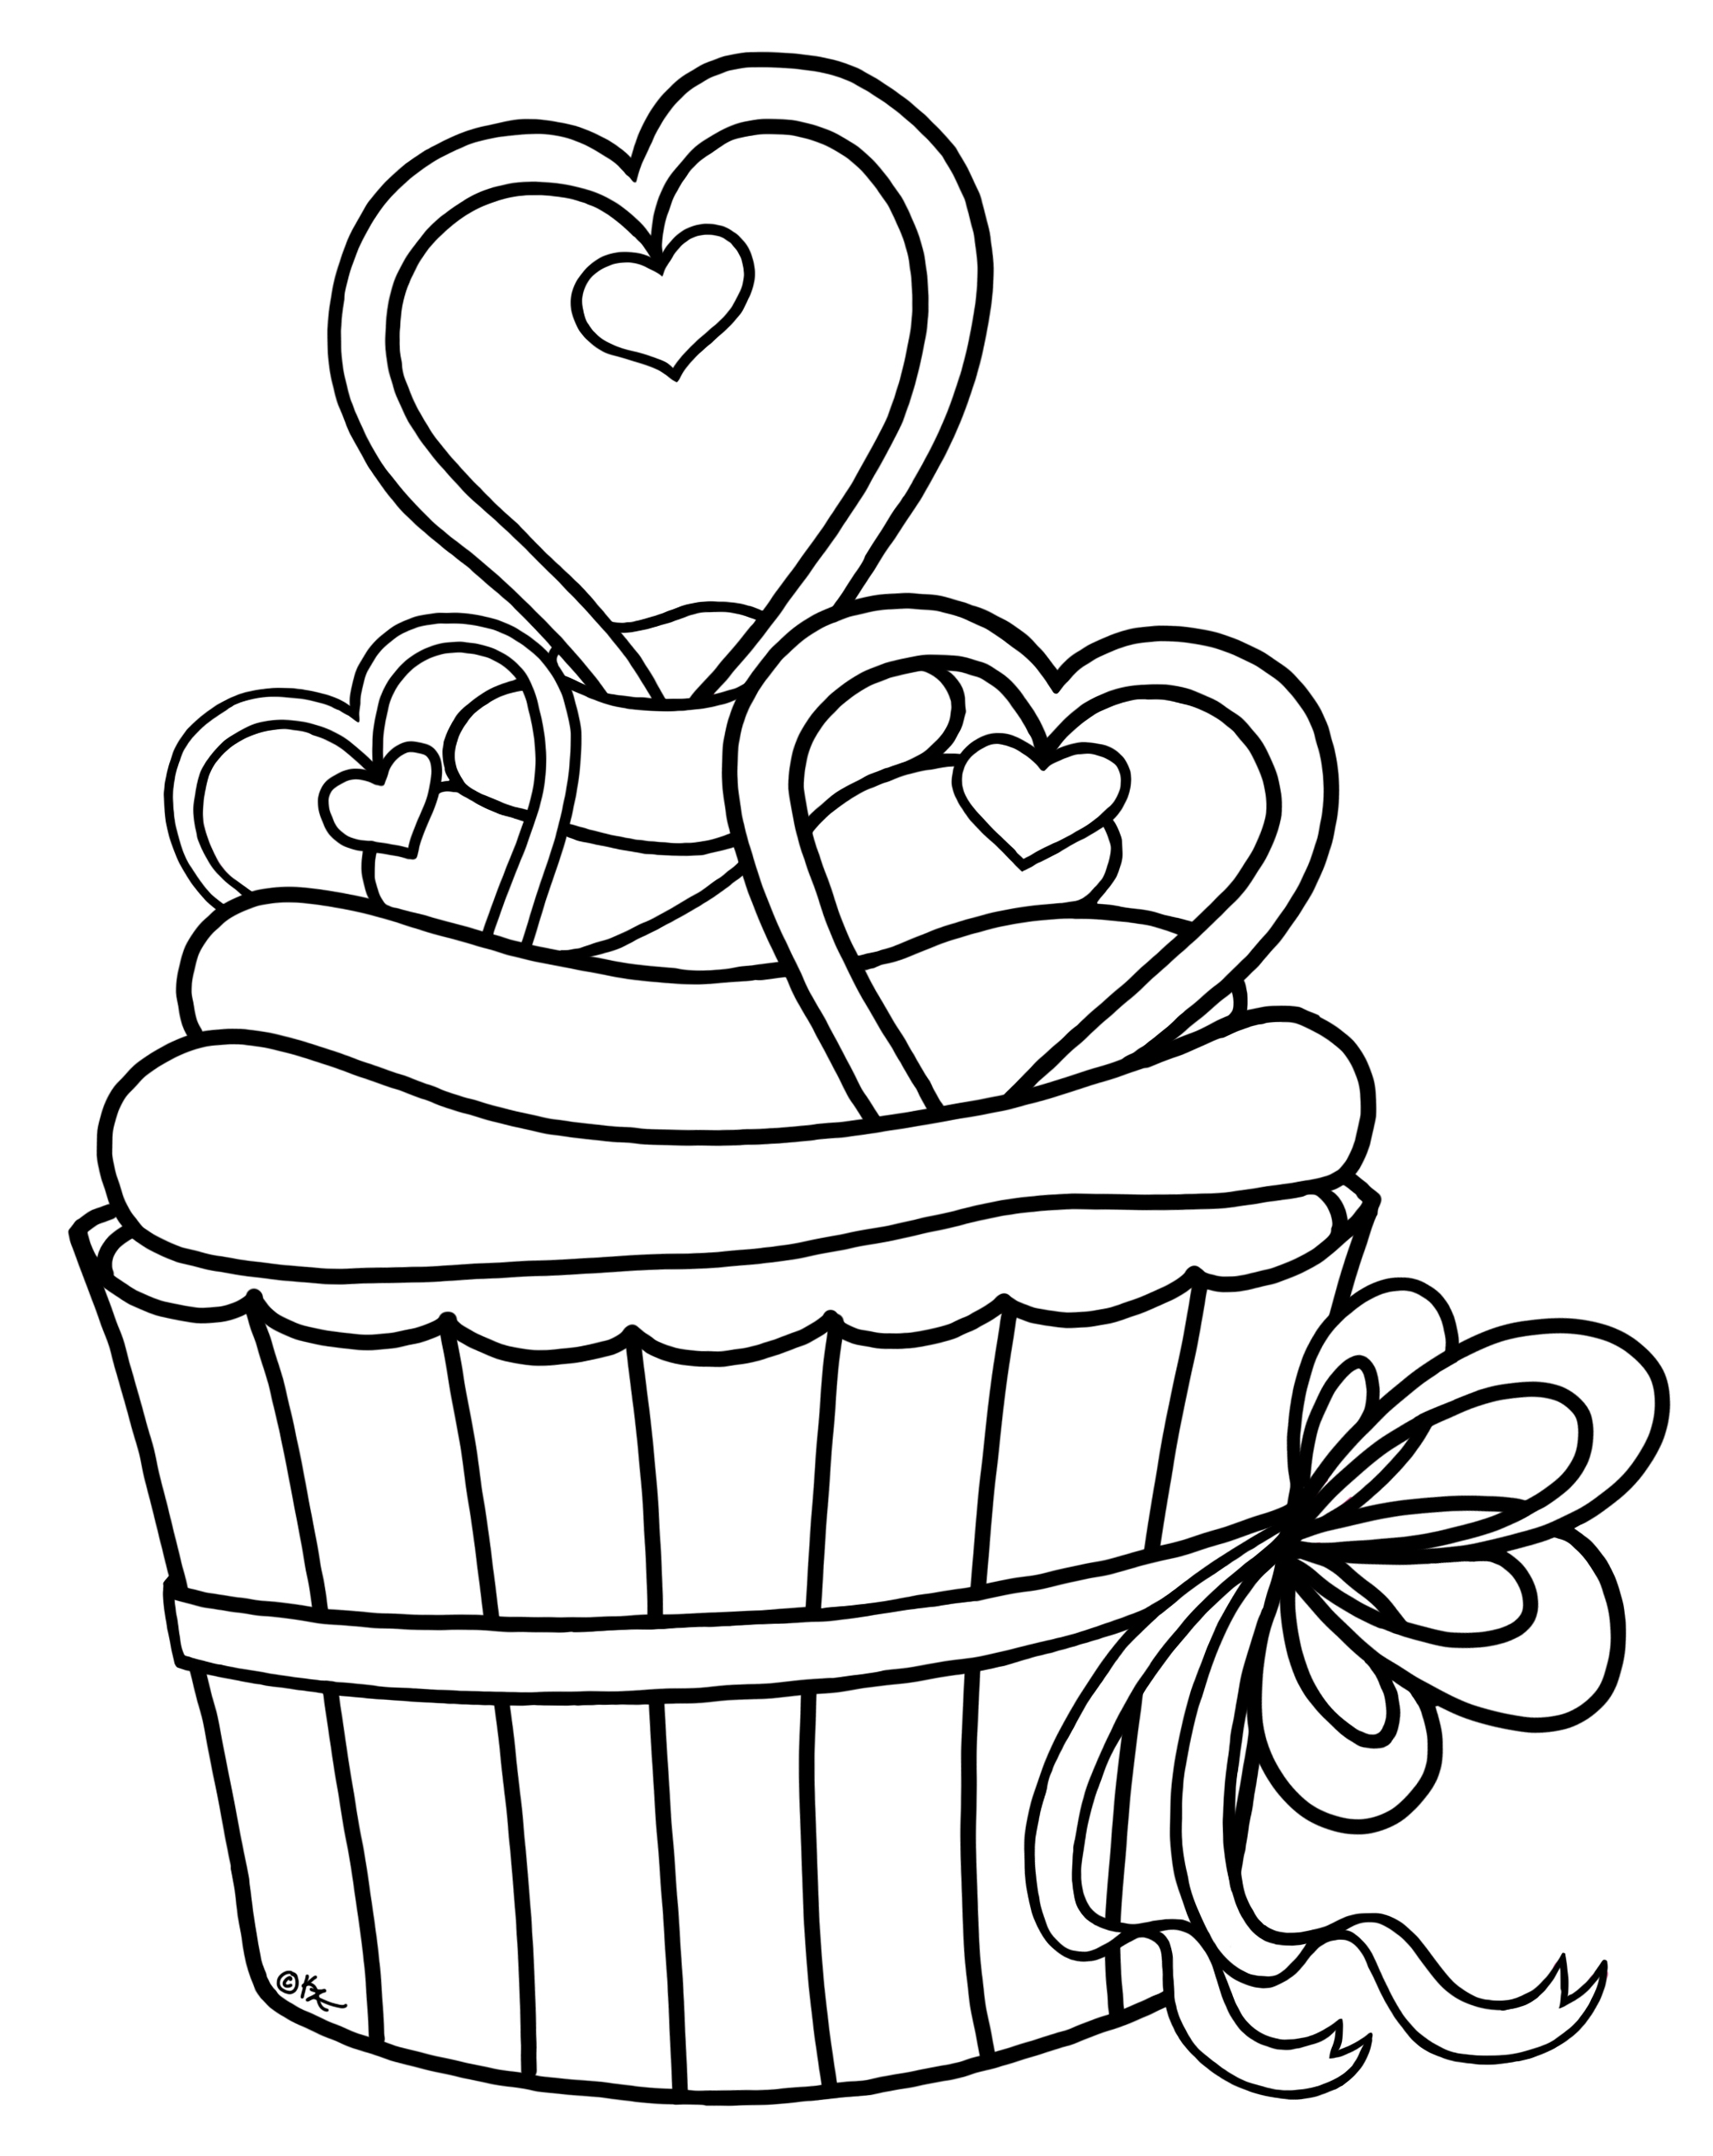 Black And White Cupcake Drawing Images & Pictures - Becuo